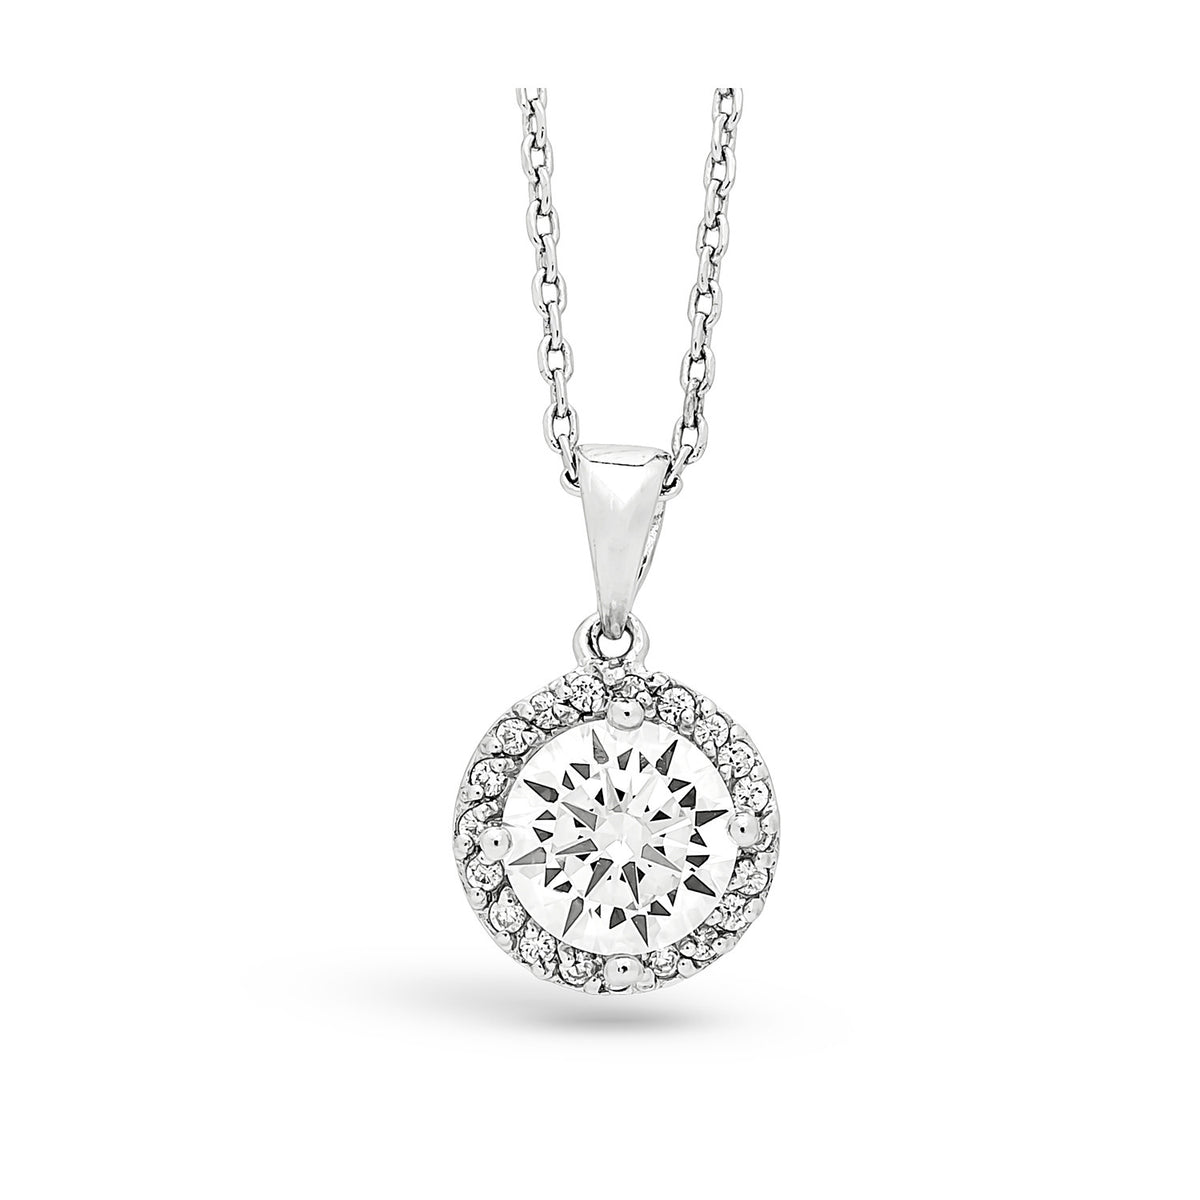 Grecian Pendant - 925 Sterling Silver 18K White Gold Plated - Crystals ...